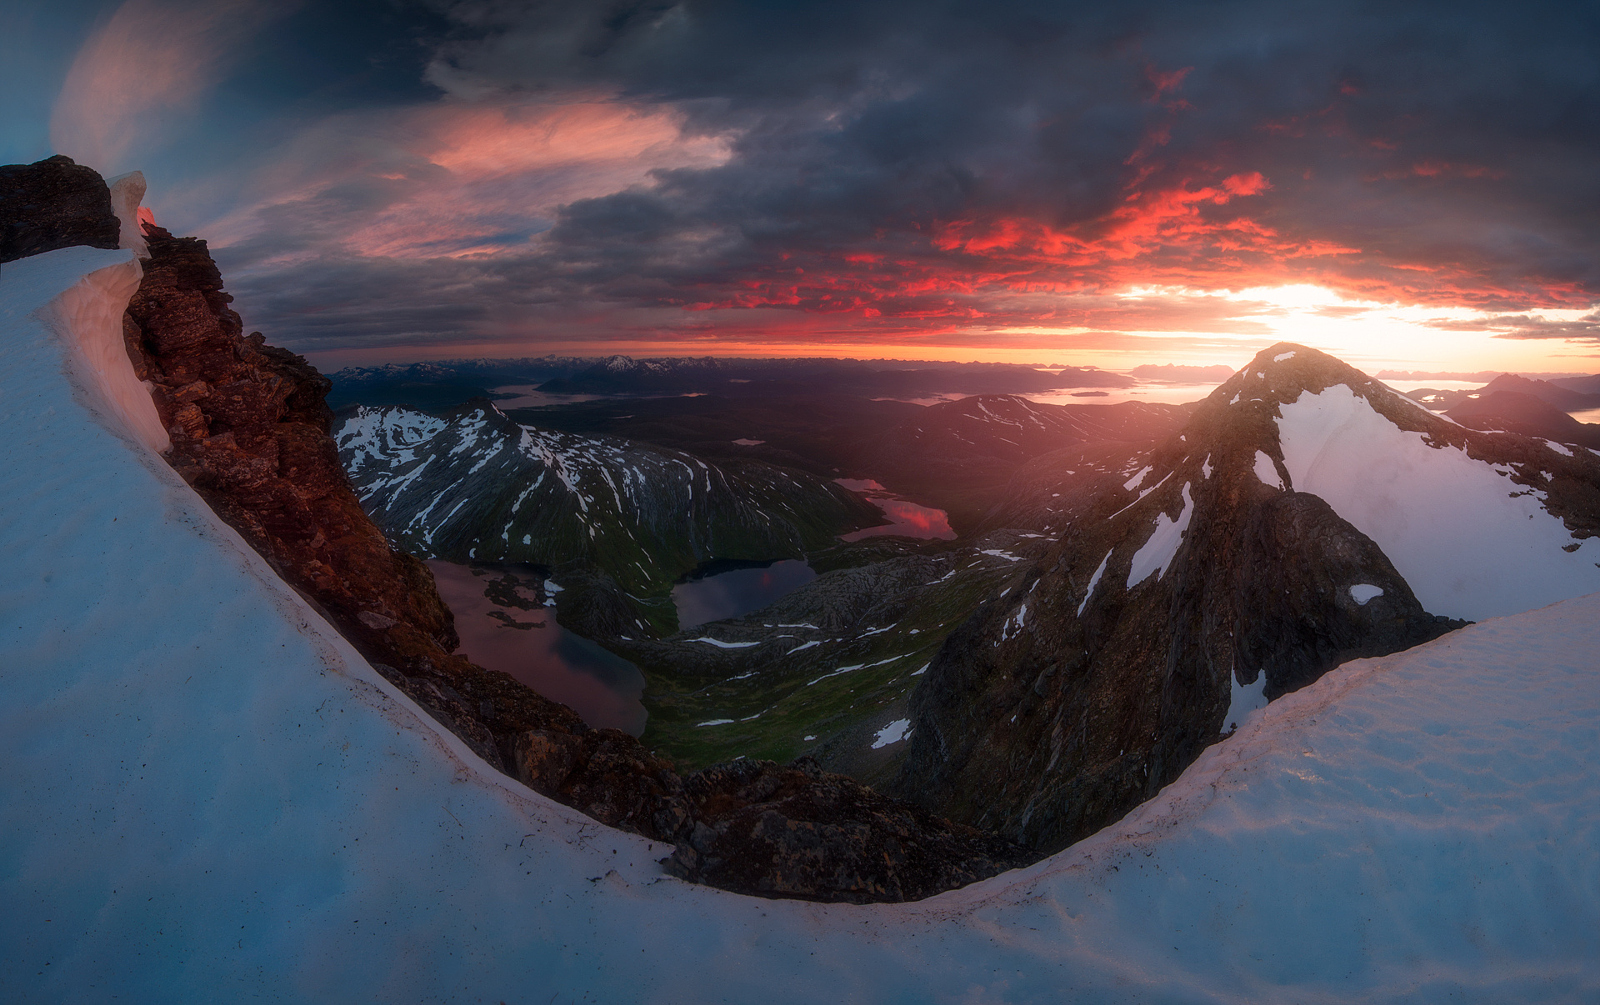 Exploring a Remote Mountain Paradise with Max Rive